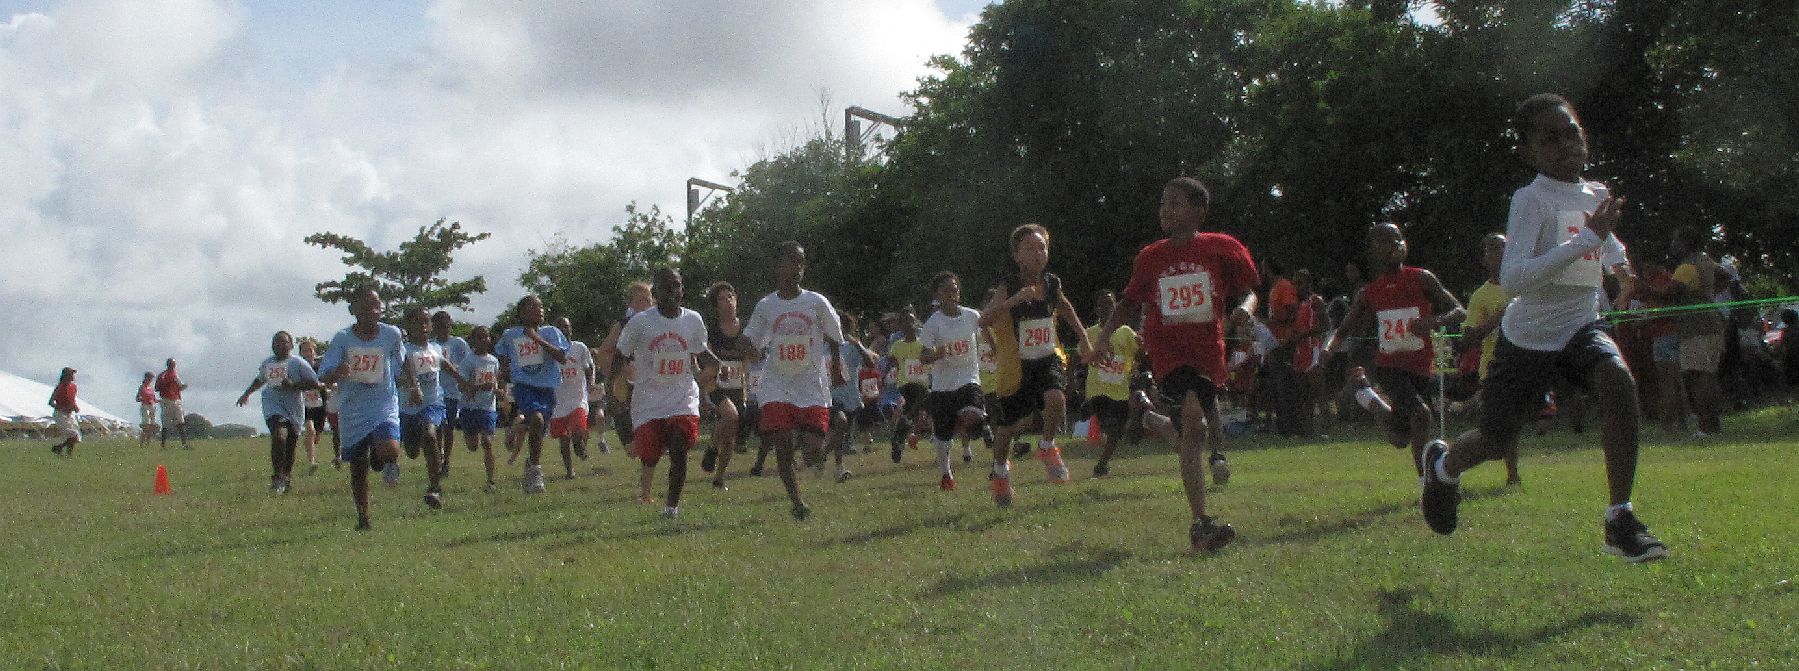 The boys get after it in the boys under 14 and under 10 one mile race (V.I.Pace Runners Photo)